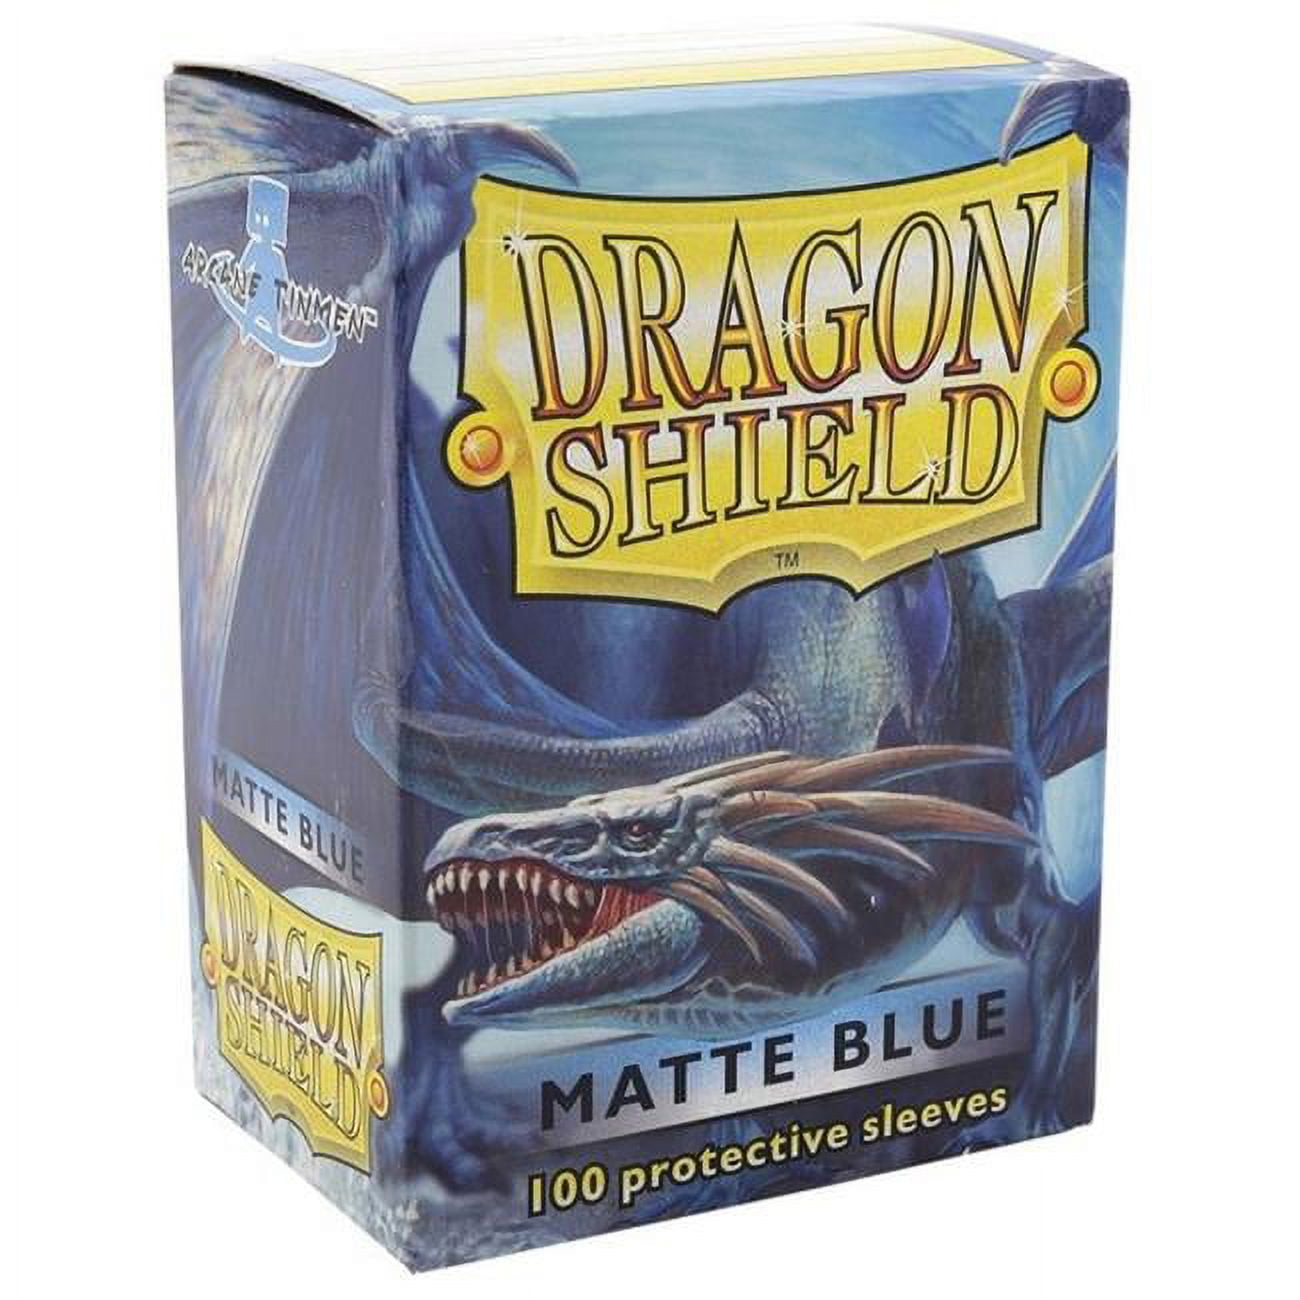 Atm11003 Dragon Shield Card Sleeves, Matte Blue - 100 Count